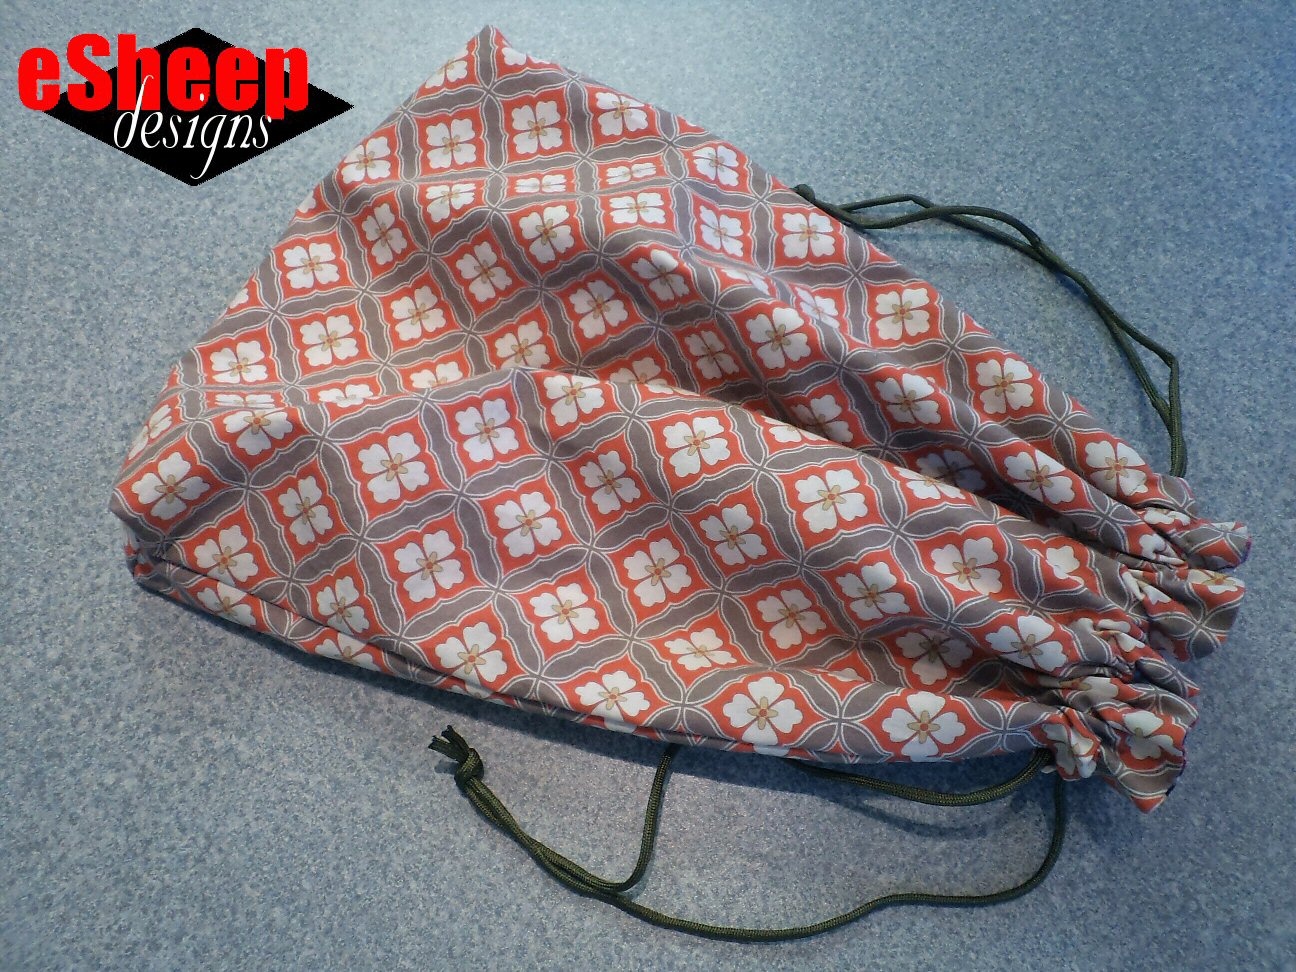 How to Make a Drawstring Bag - Best Method for Any Size